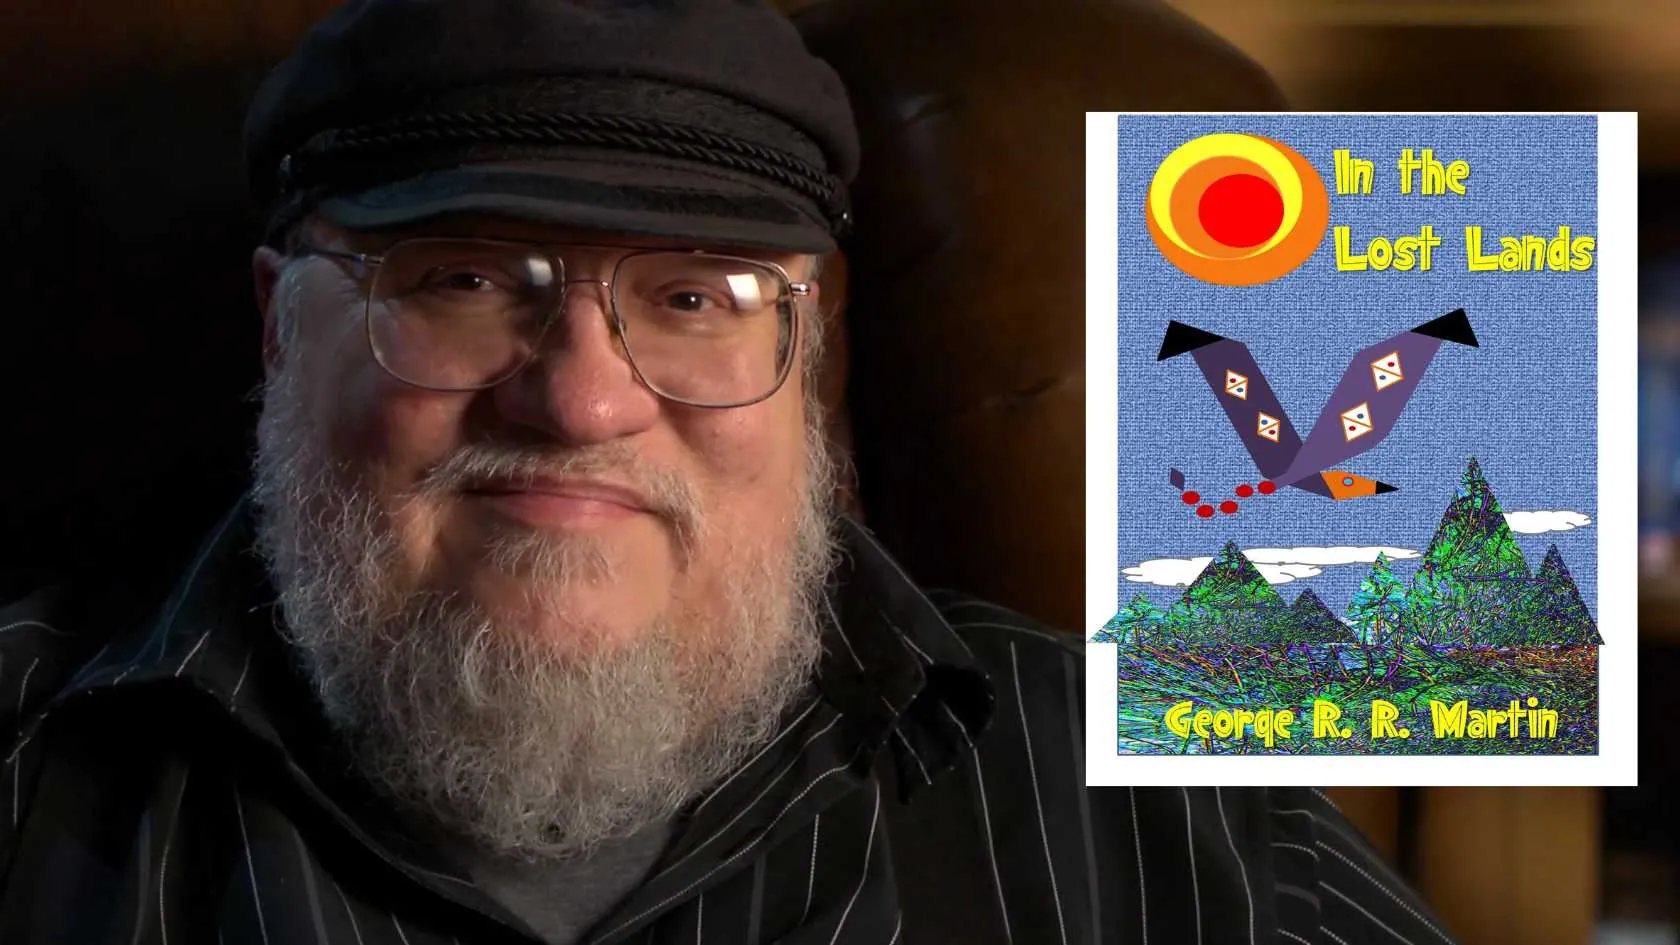 Movie based on George R.R. Martin's 'In the Lost Lands' has wrapped filming